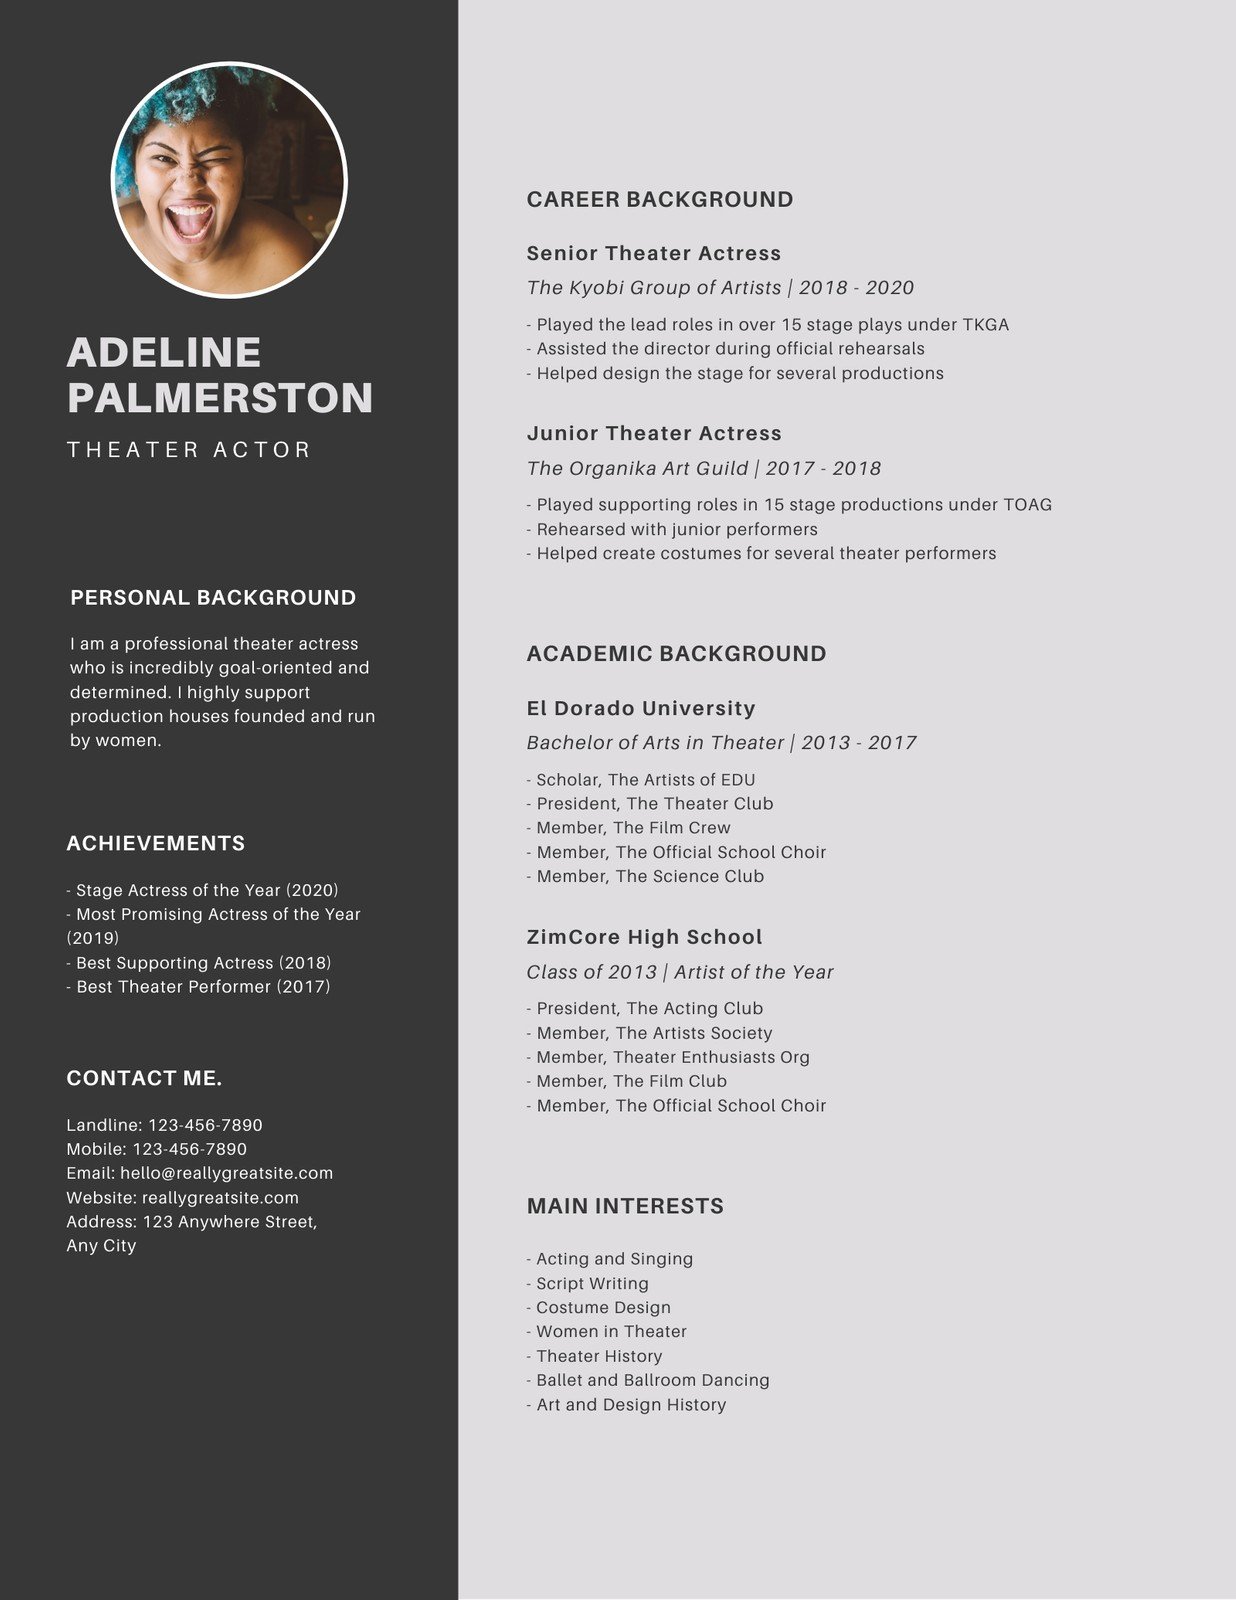 Customize 24+ Acting Resumes Templates Online - Canva With Regard To Theatrical Resume Template Word